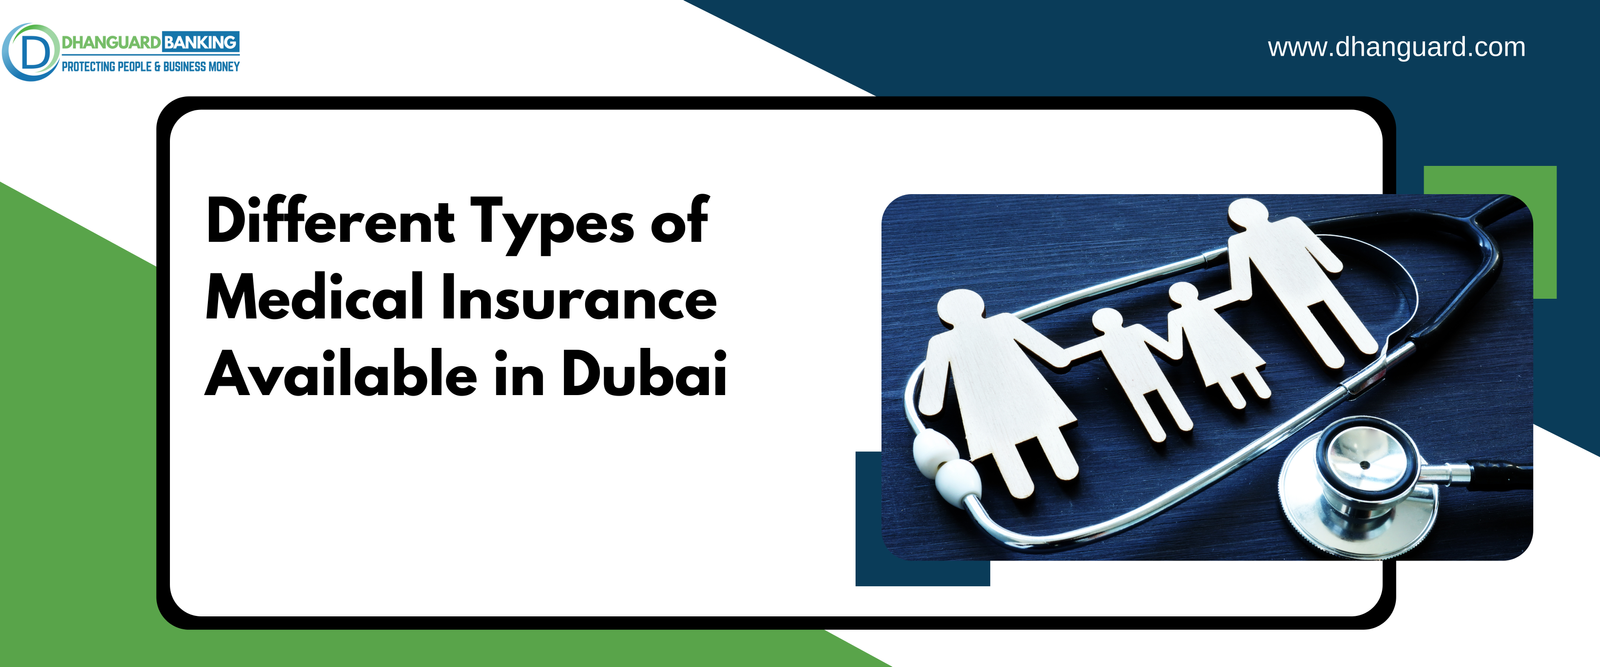 Different Types of Medical Insurance Available in Dubai | Dhanguard